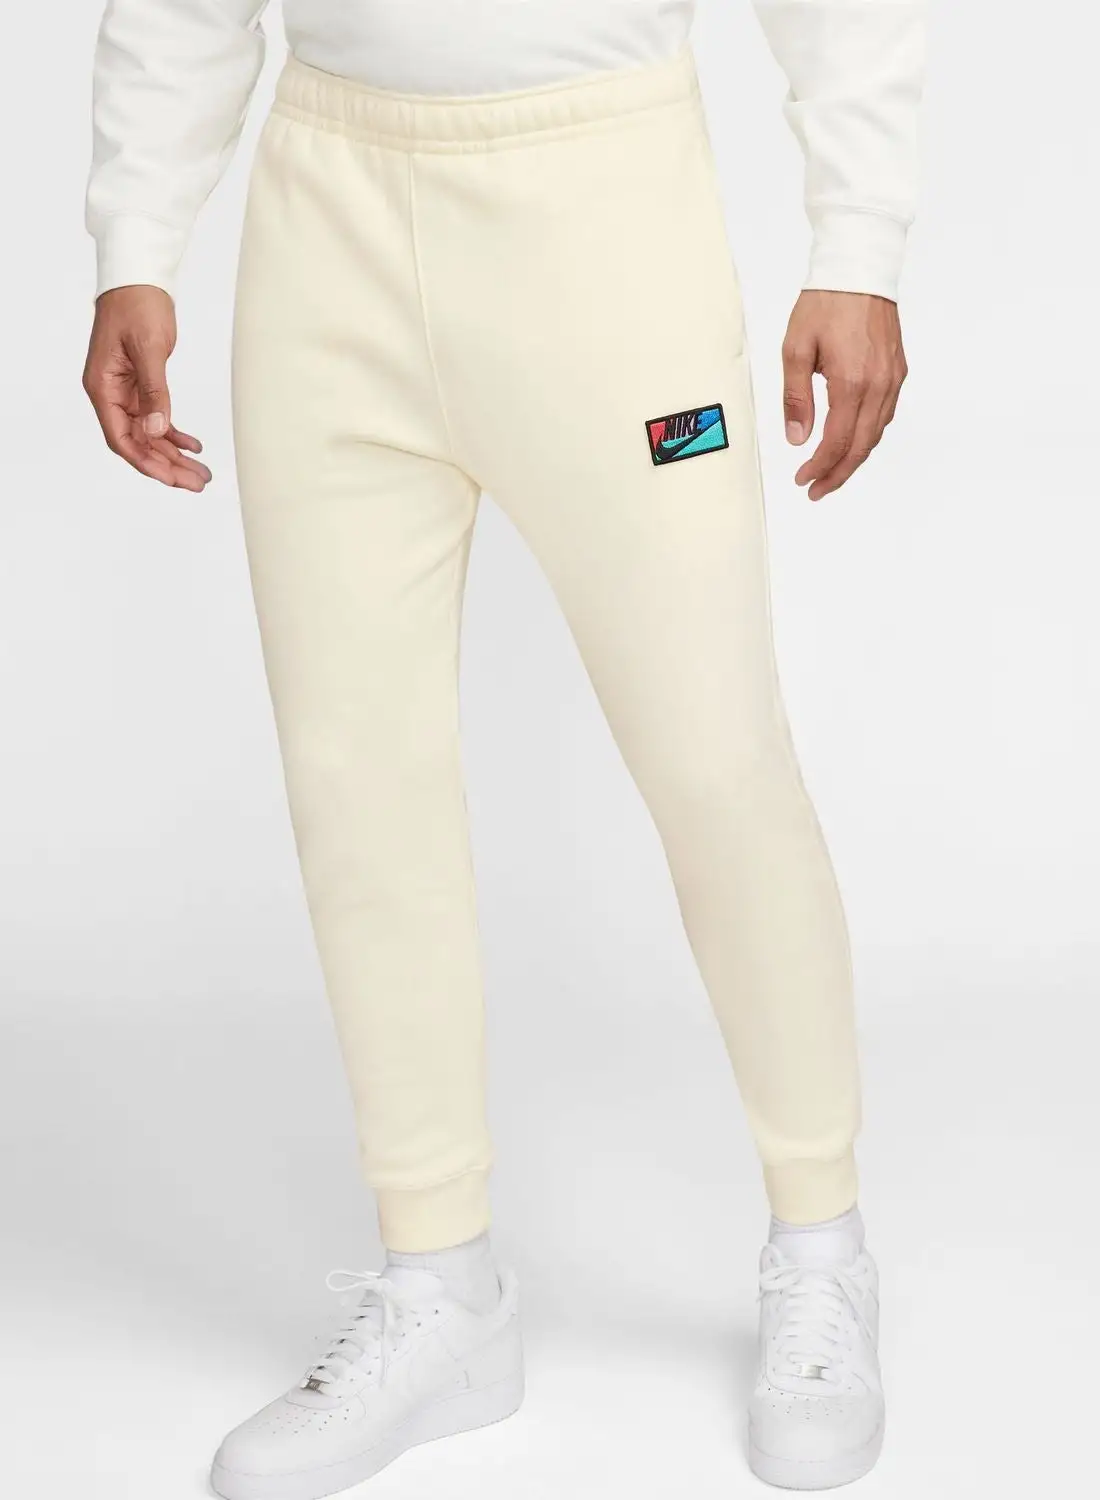 Nike Club+ Patch Graphic Pants